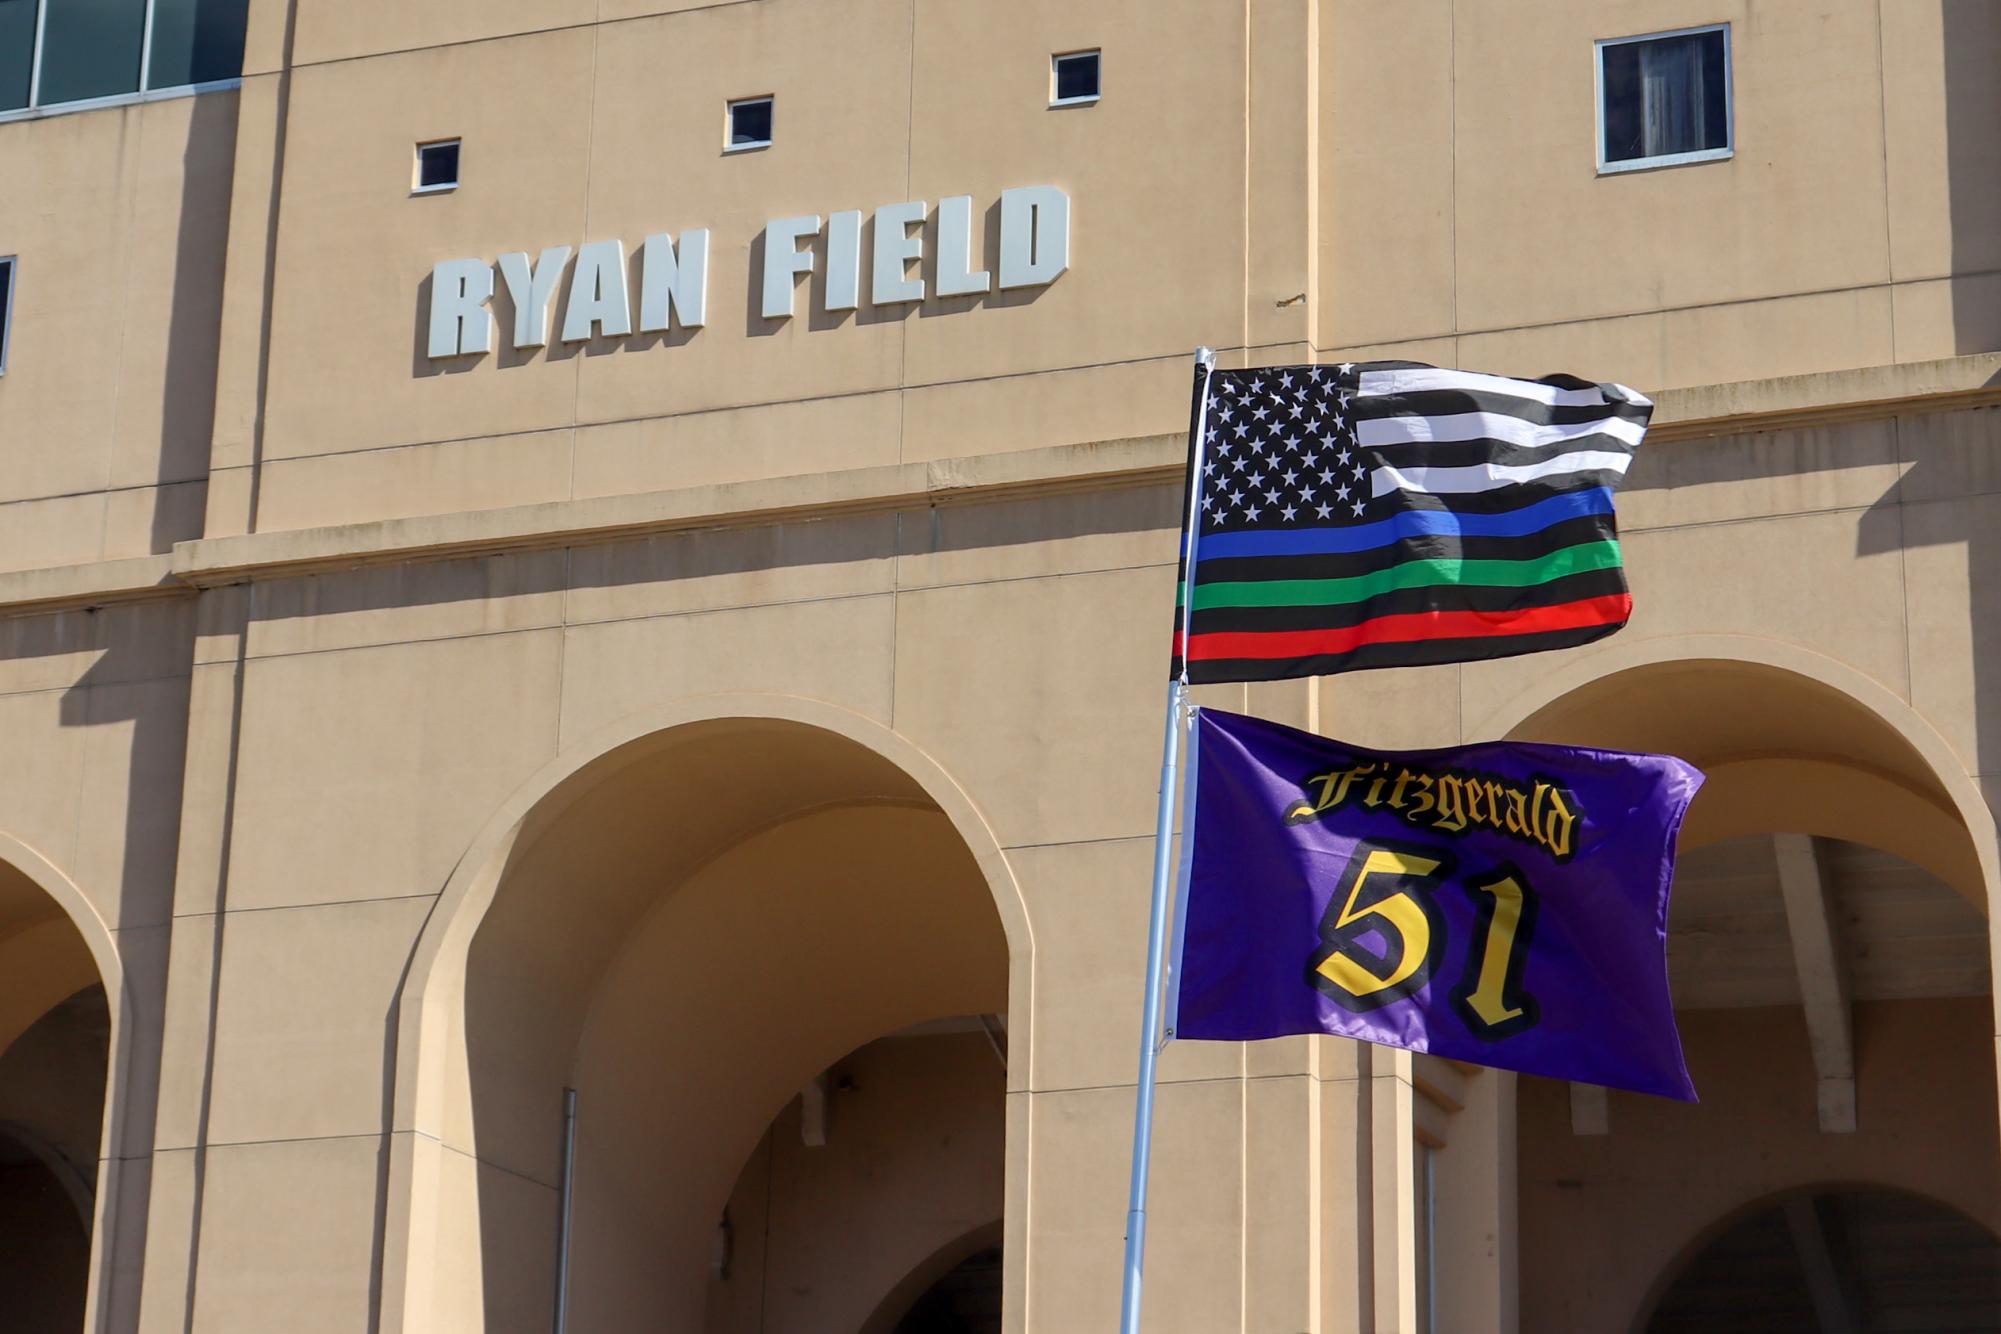 Flags are waved in front of a Ryan Field sign.